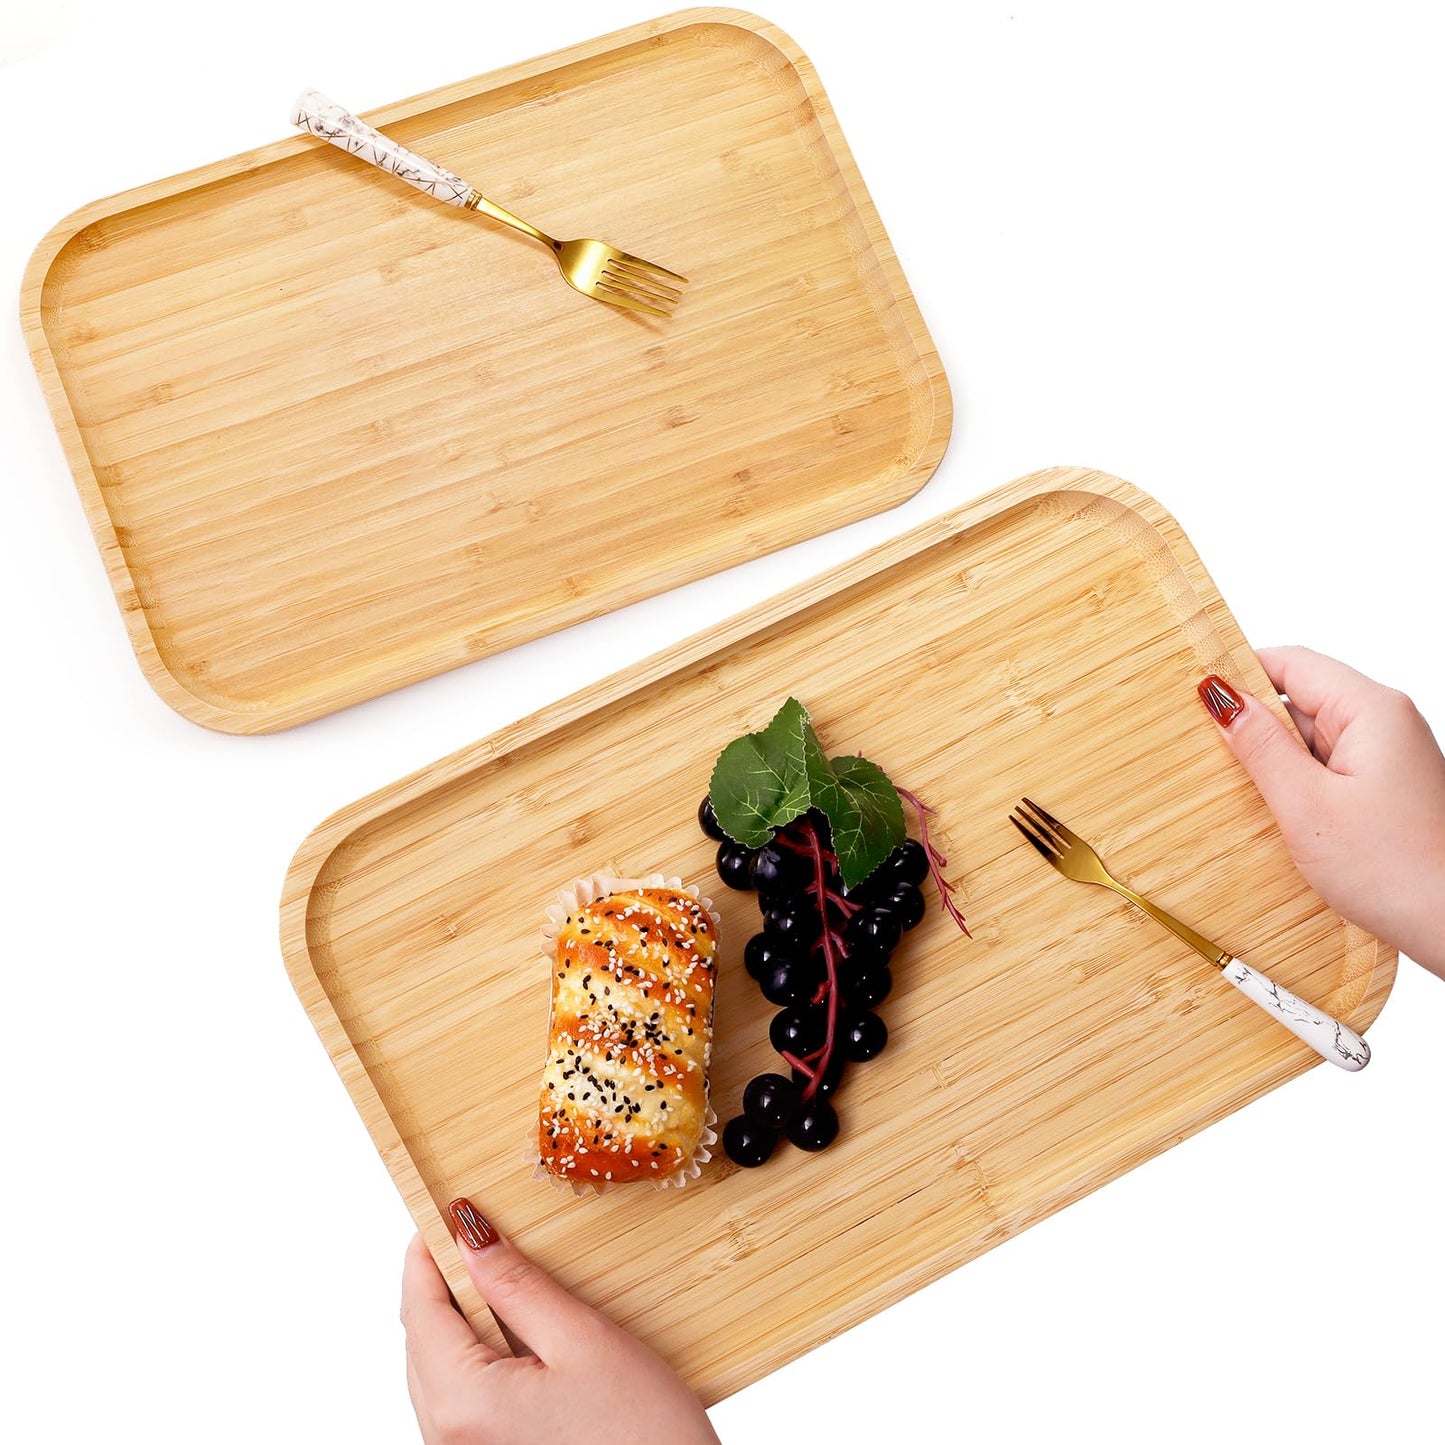 Yarlung 2 Pack Bamboo Tray Cheese Plate, 14x9 Inches Food Serving Saucer Wood Rectangular Platter for Coffee, Tea, Fruit, Plant Pot